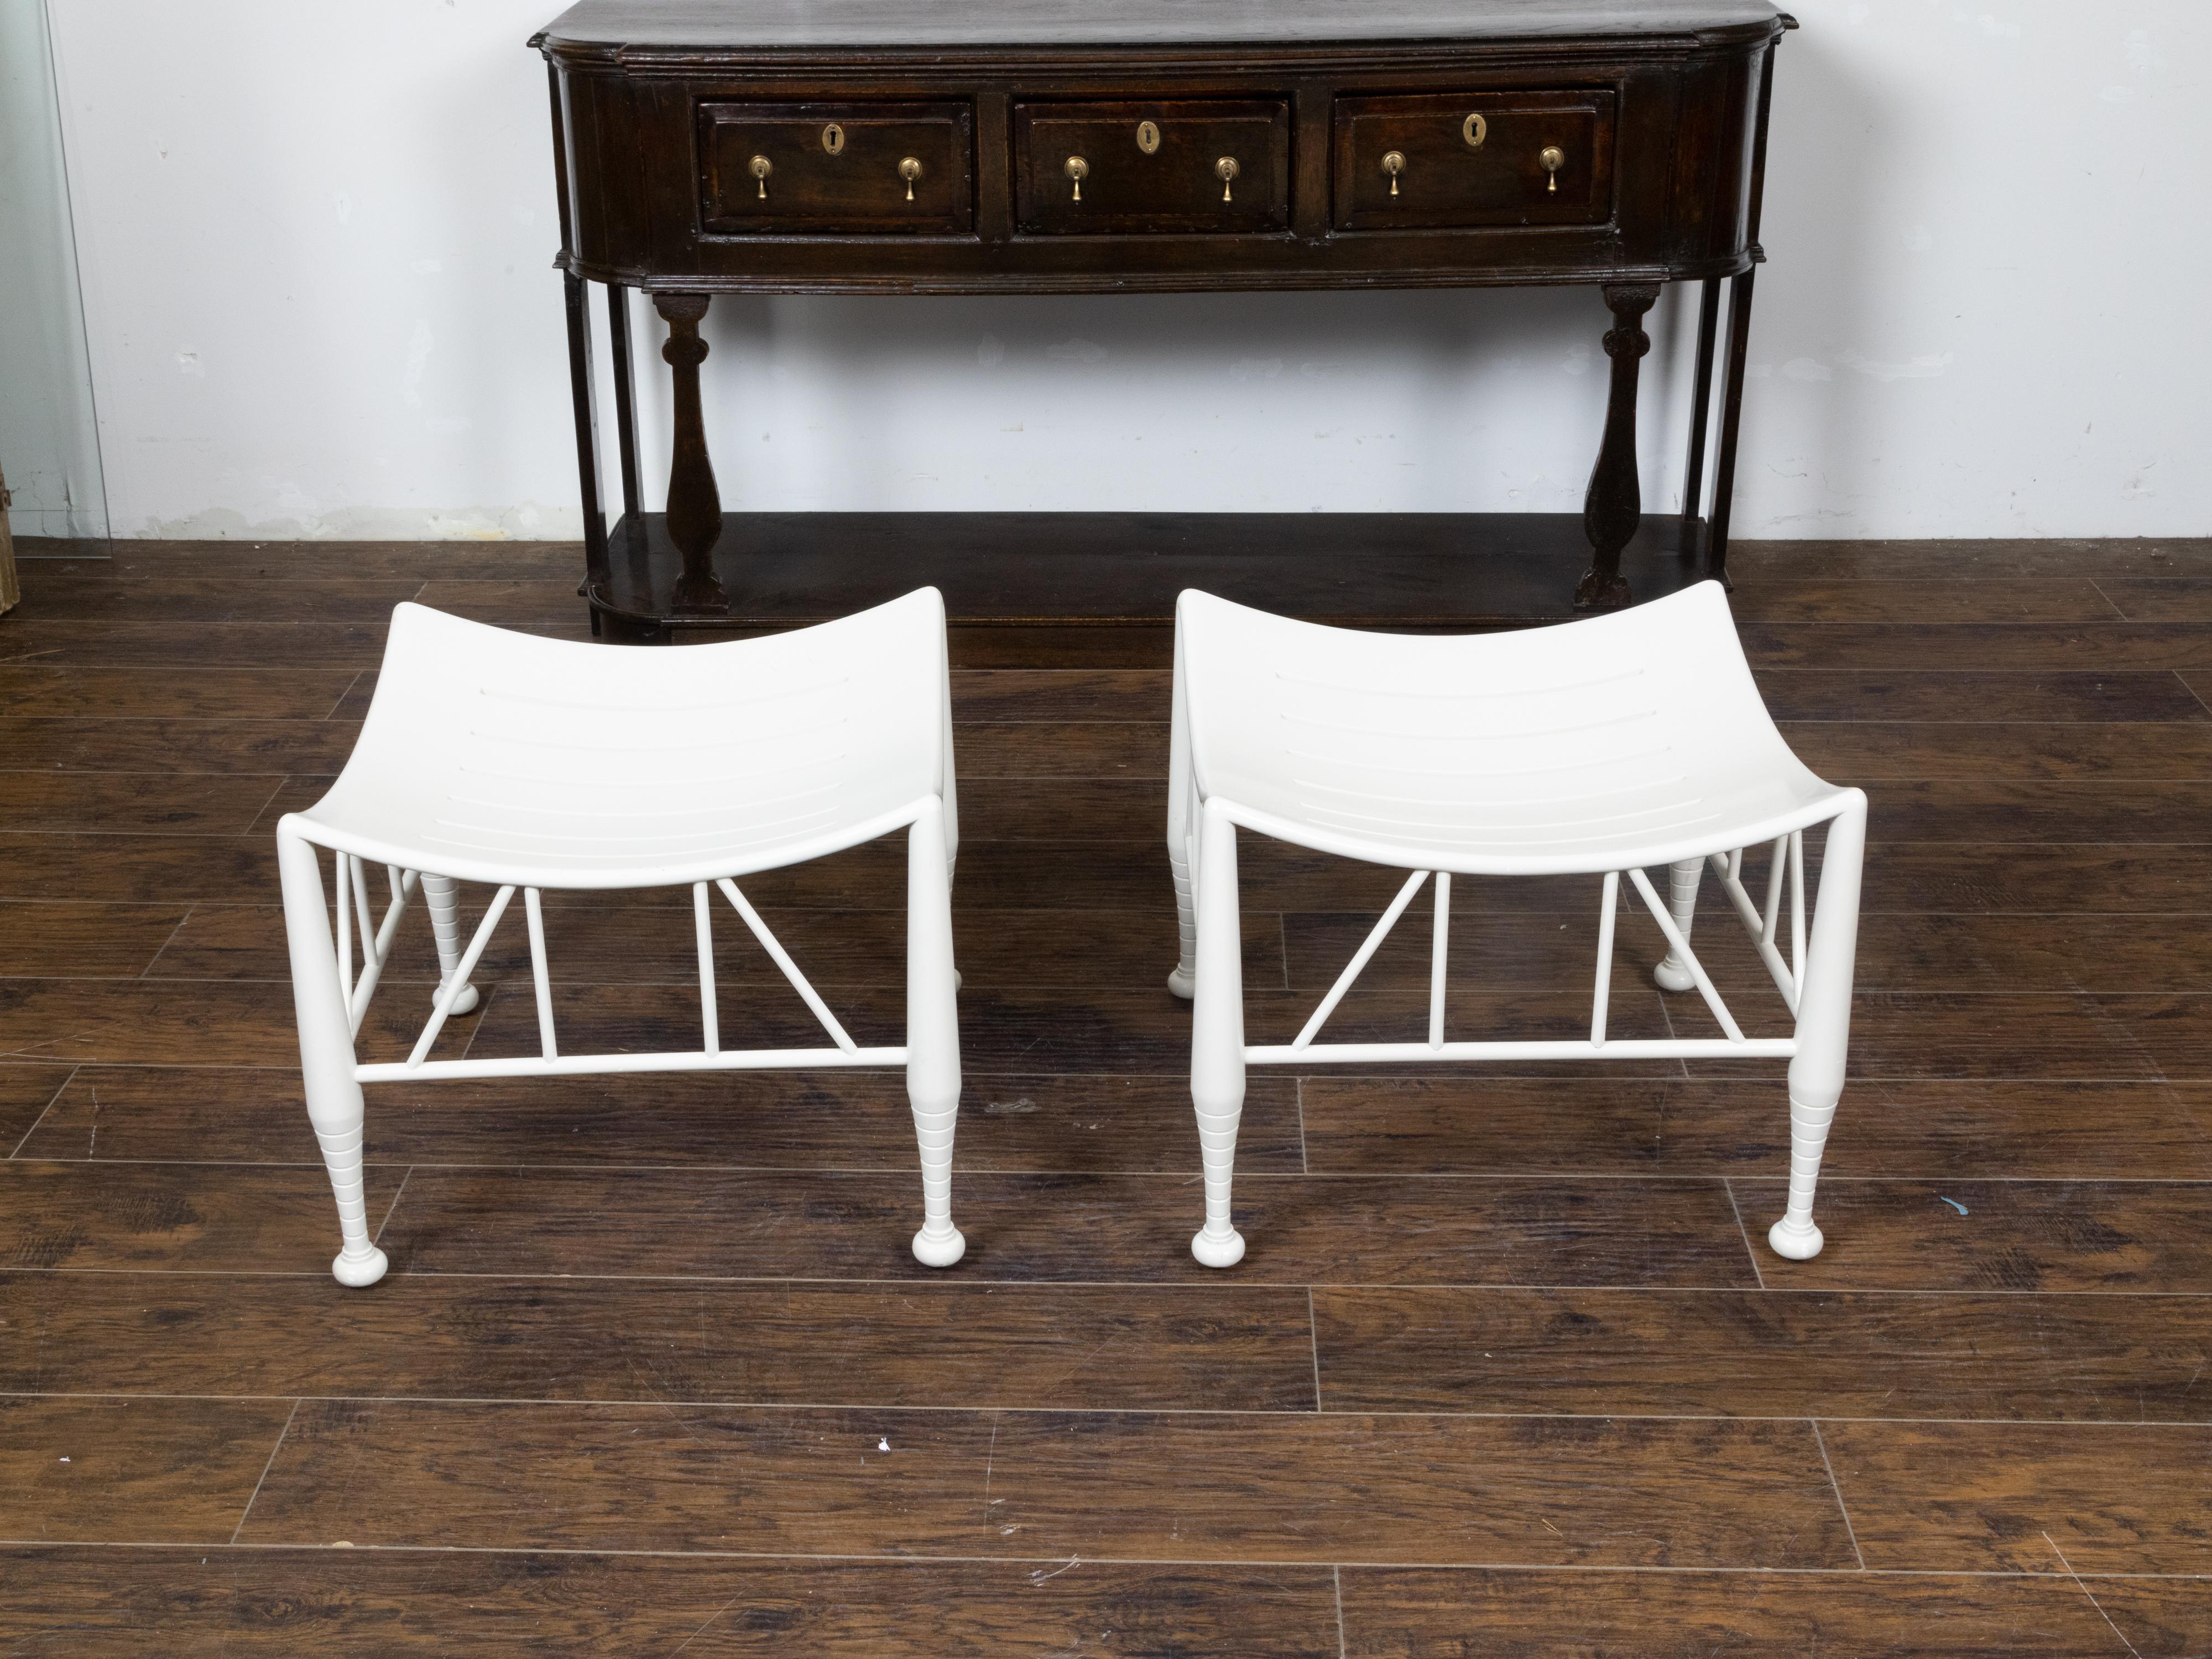 Carved Pair of Vintage English Egyptian Revival White Thebes Stools with Curving Seats For Sale